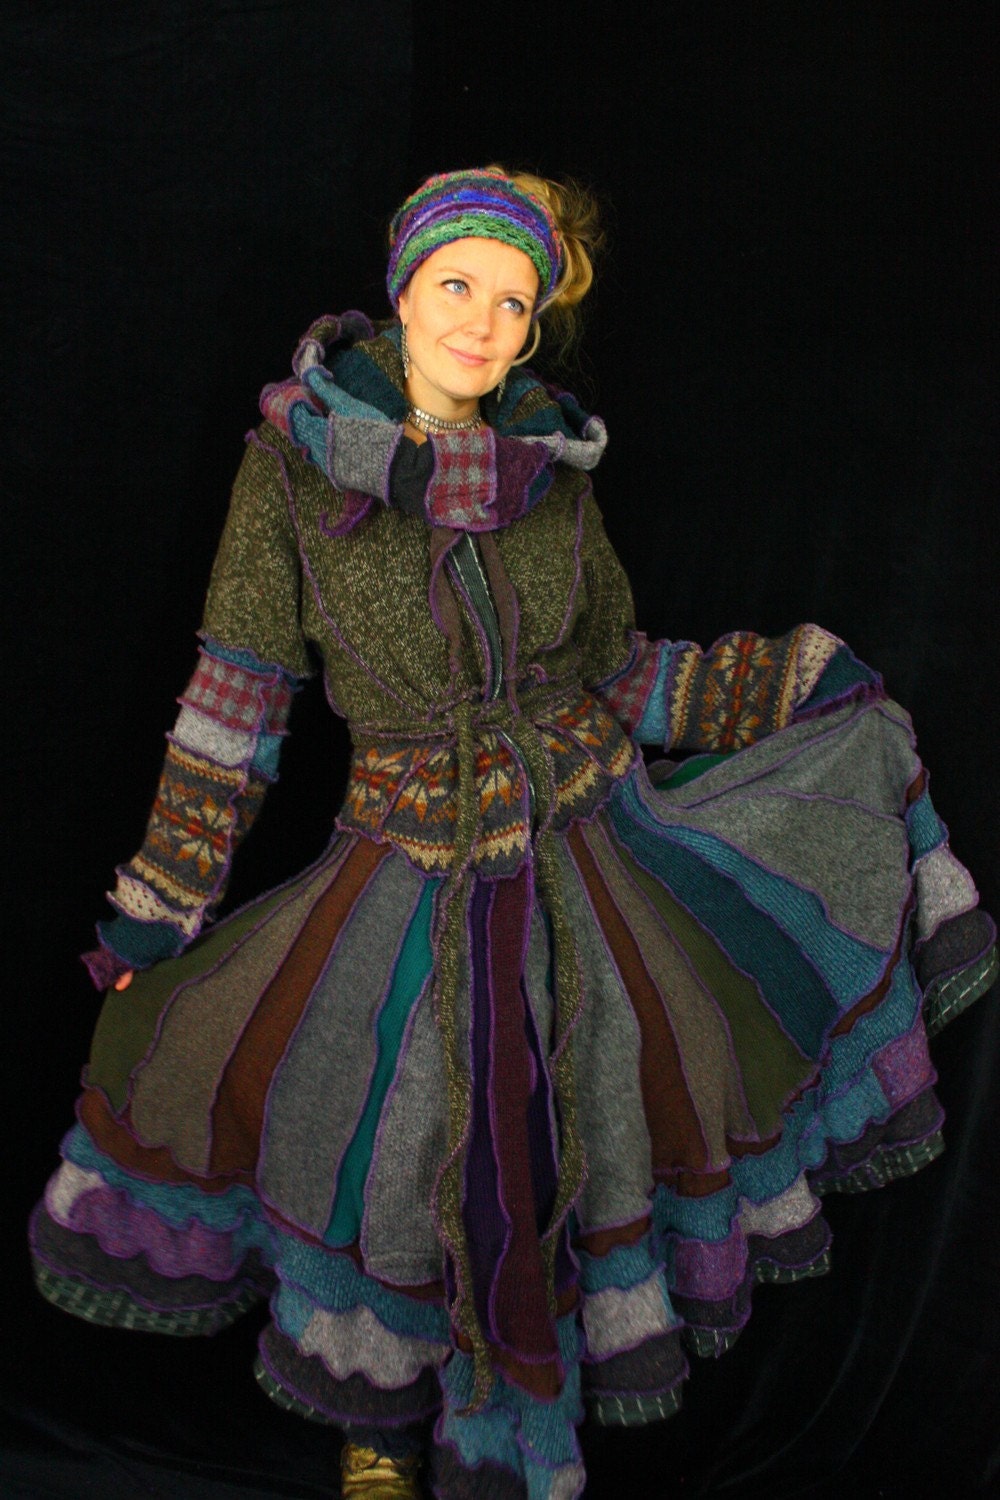 RESERVED FOR ABBY FREESPIRIT - ELF COAT - Long Recycled Sweater Coat -crazyquilt gypsy traveller festival pixie cloak -  upcycled Cadigan jumper